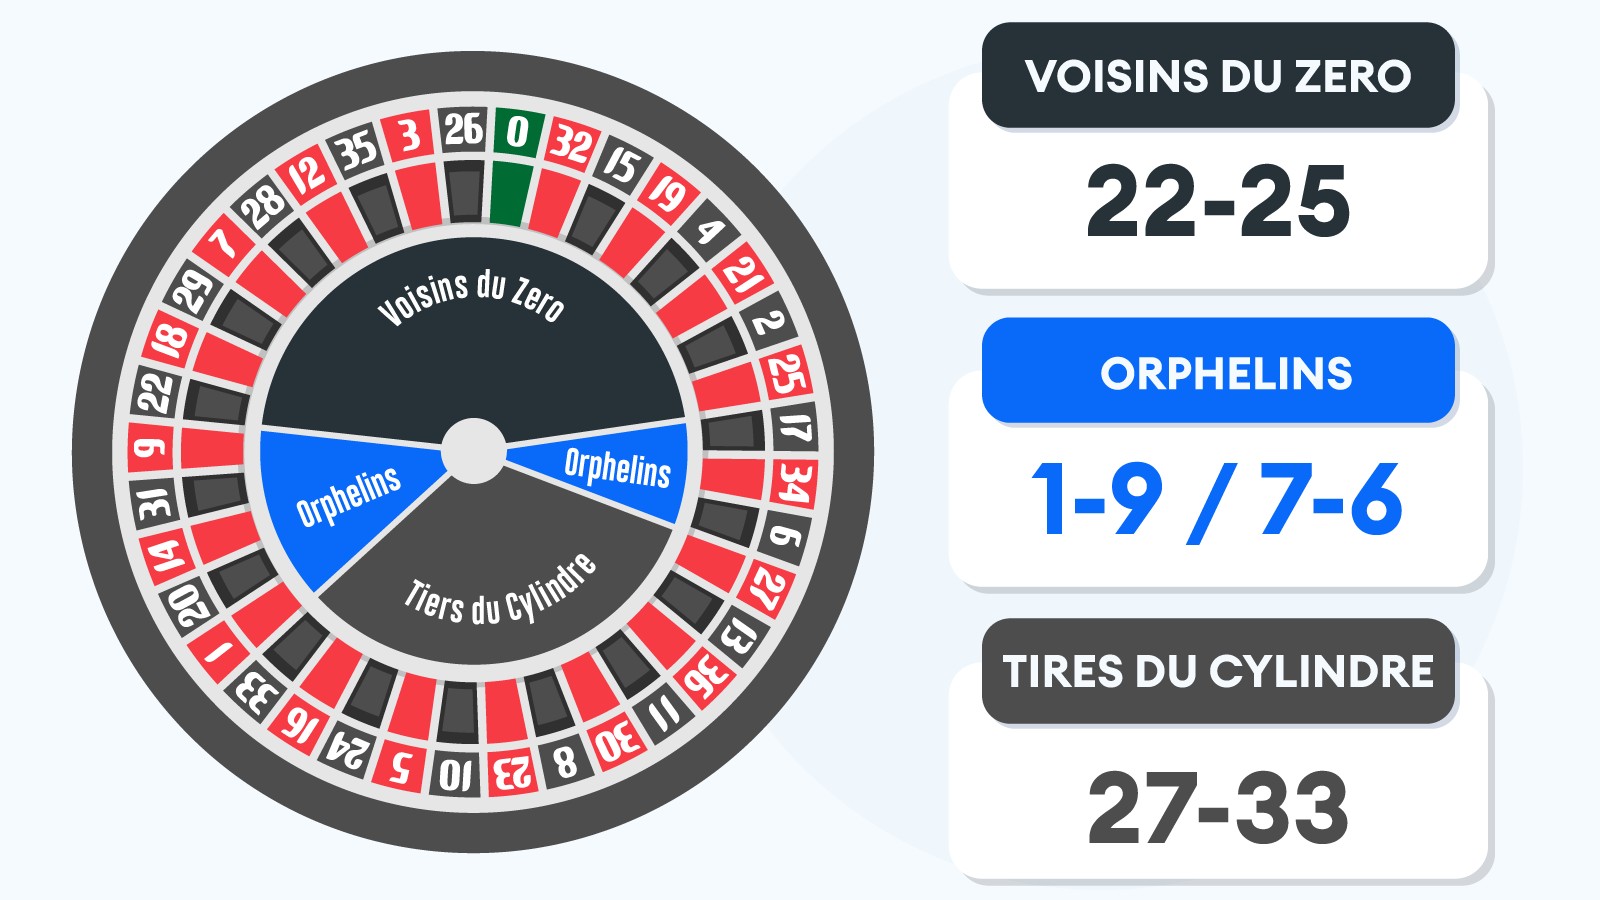 Orphelins, Voisins, and Tiers Roulette